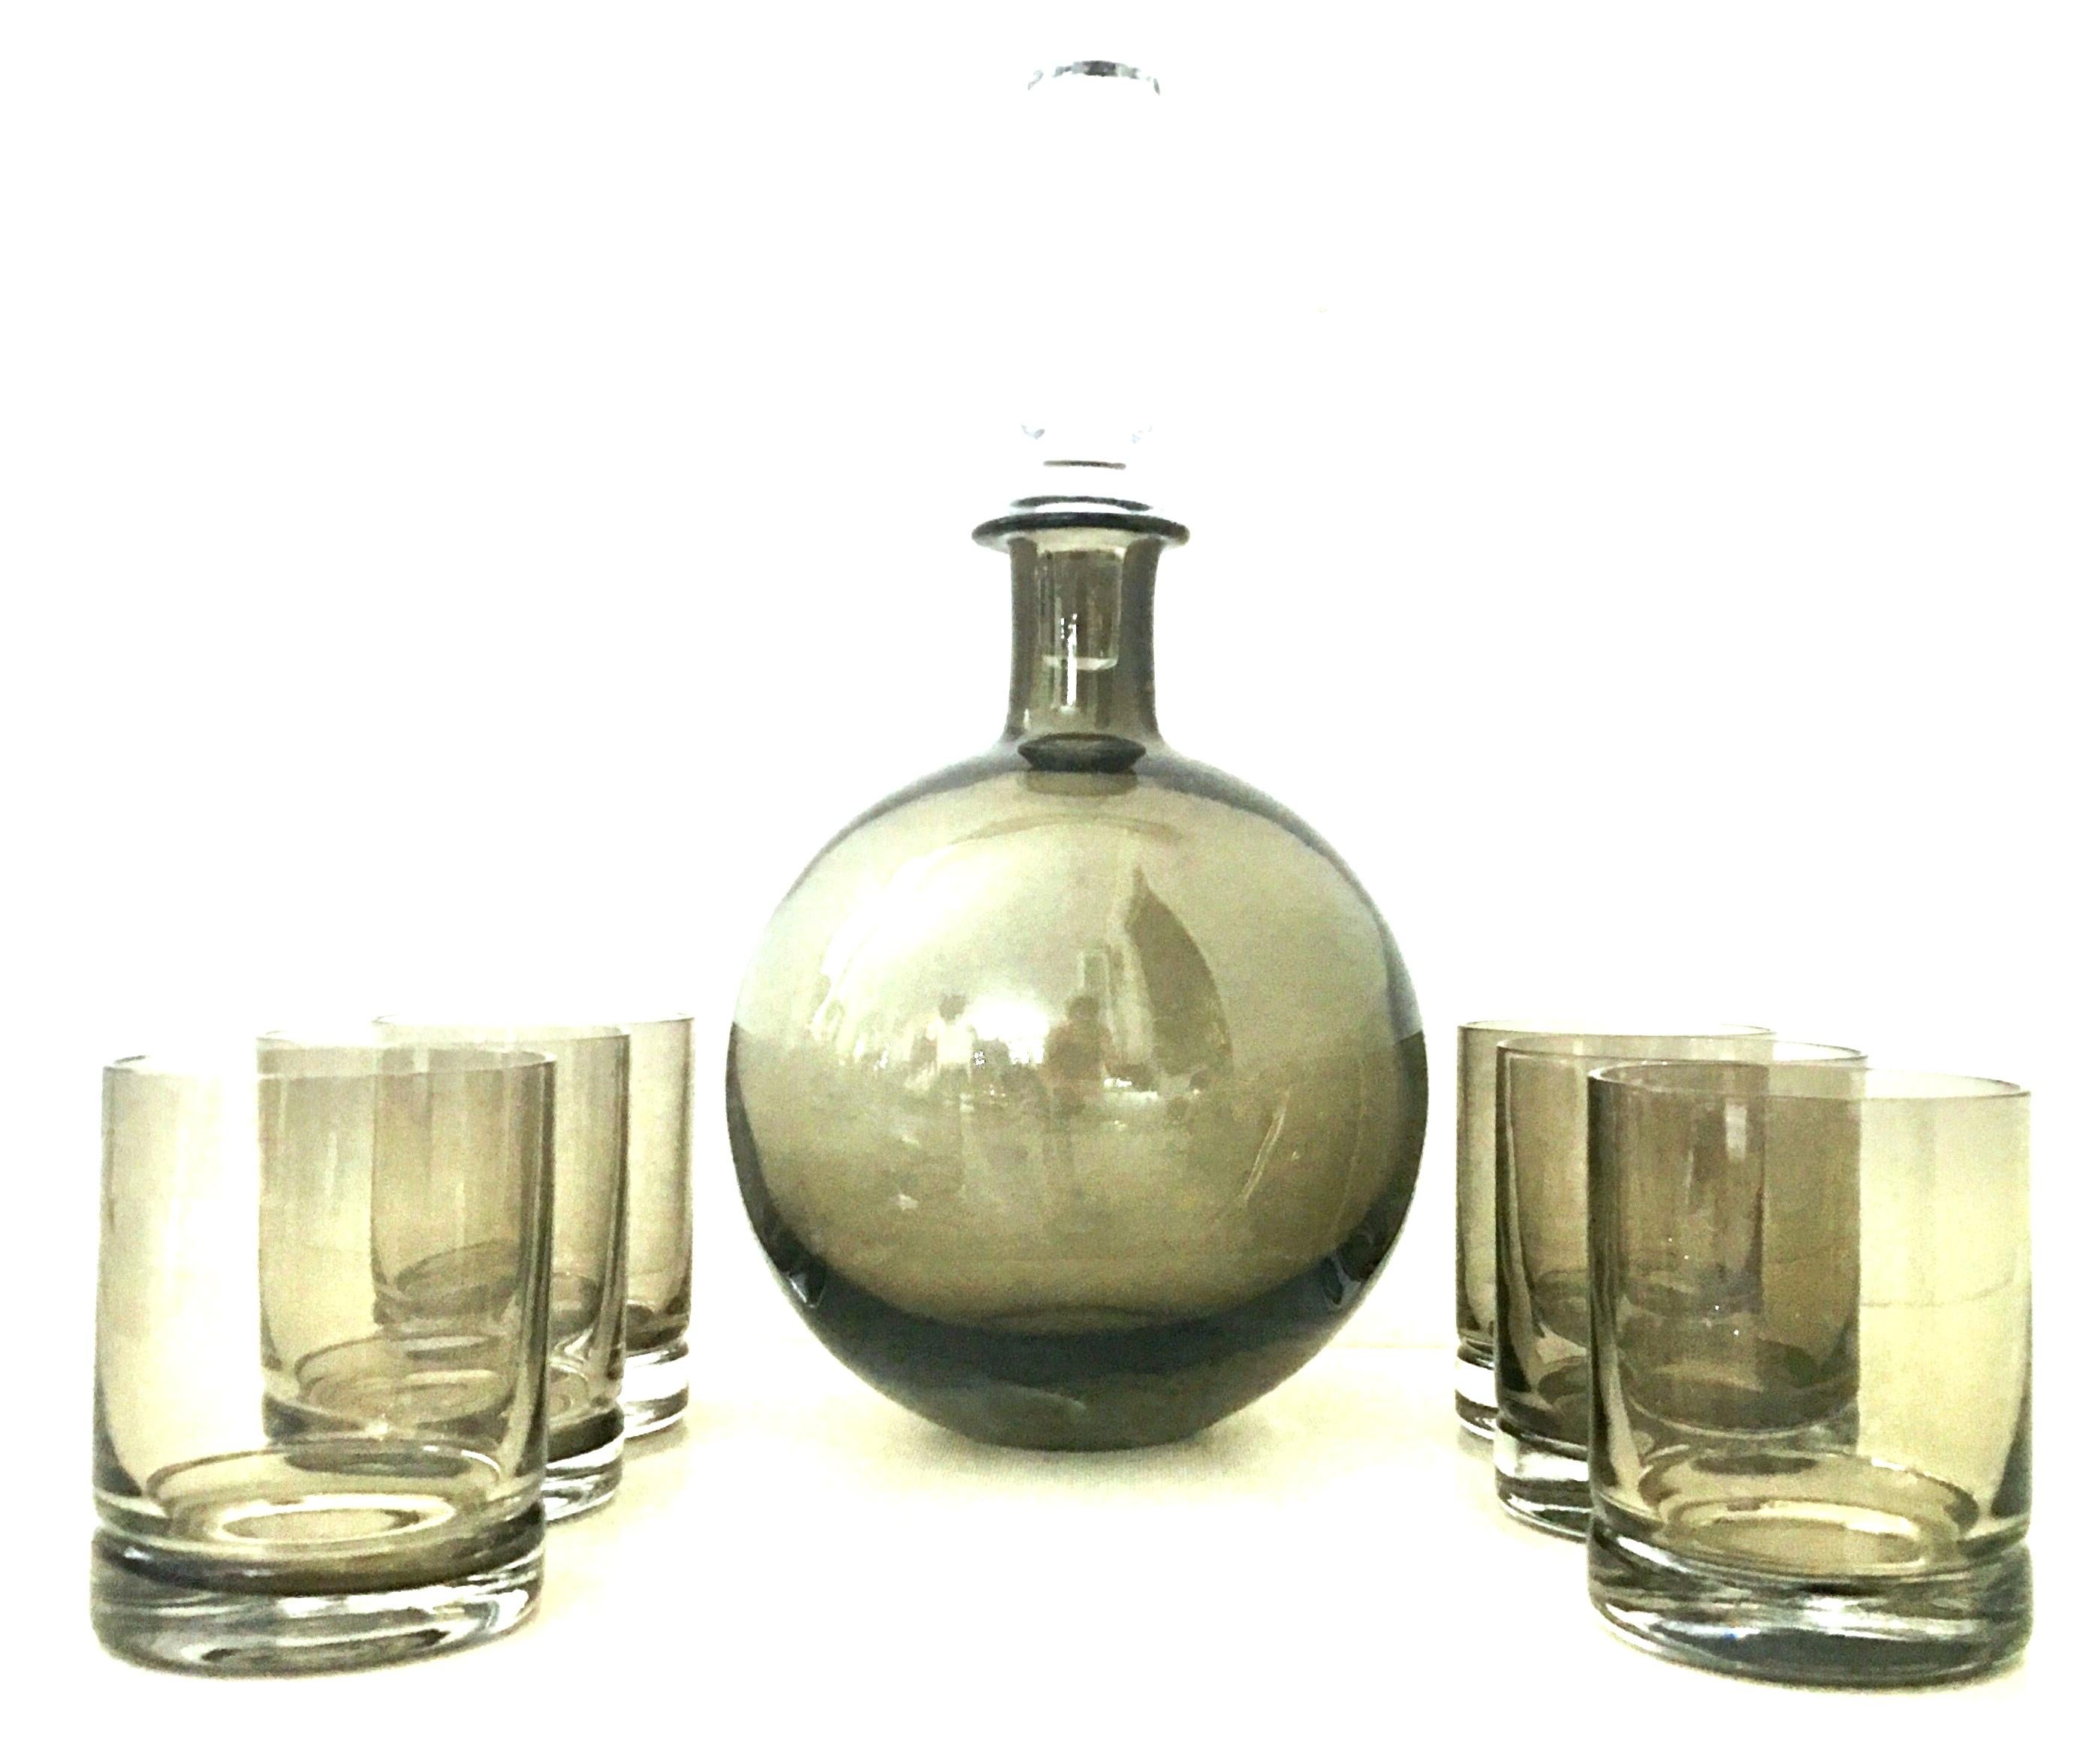 21st Century Contemporary blown glass decanter with stopper and six double old fashion glasses in smokey topaz.
Double old fashion glasses measure, 4